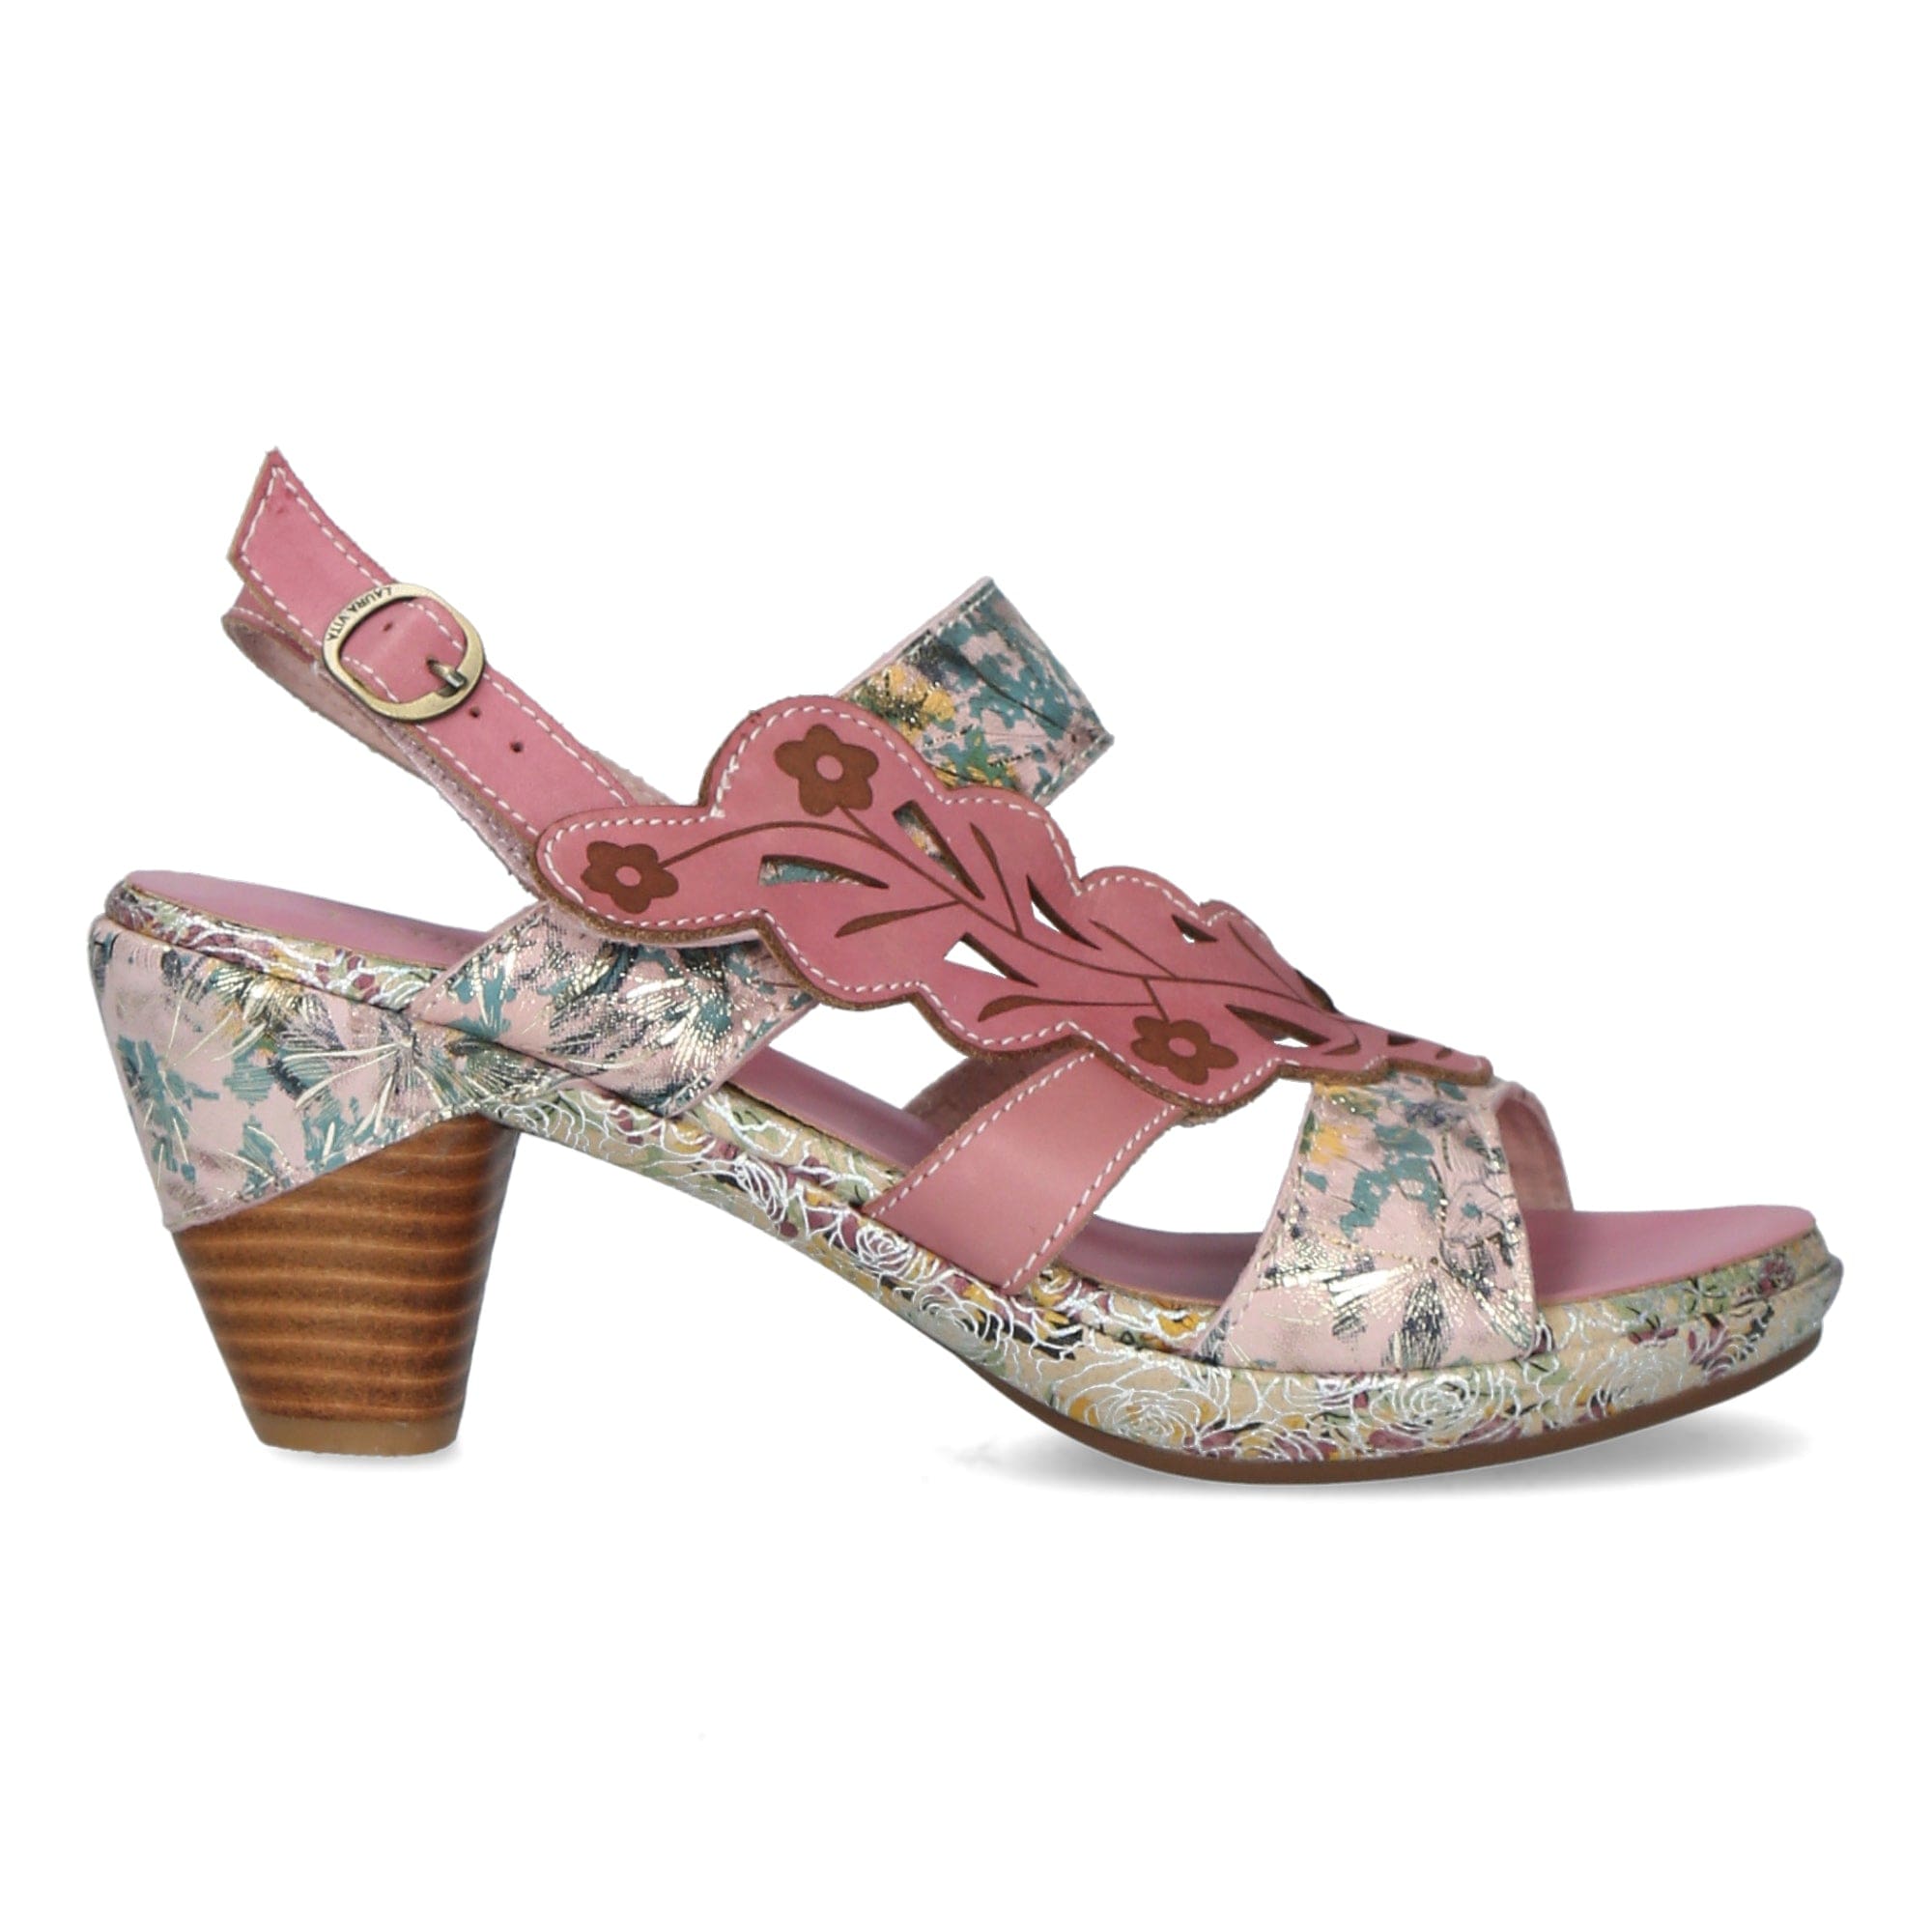 BECLFORTO Shoes 12 - 35 / PINK - Sandal